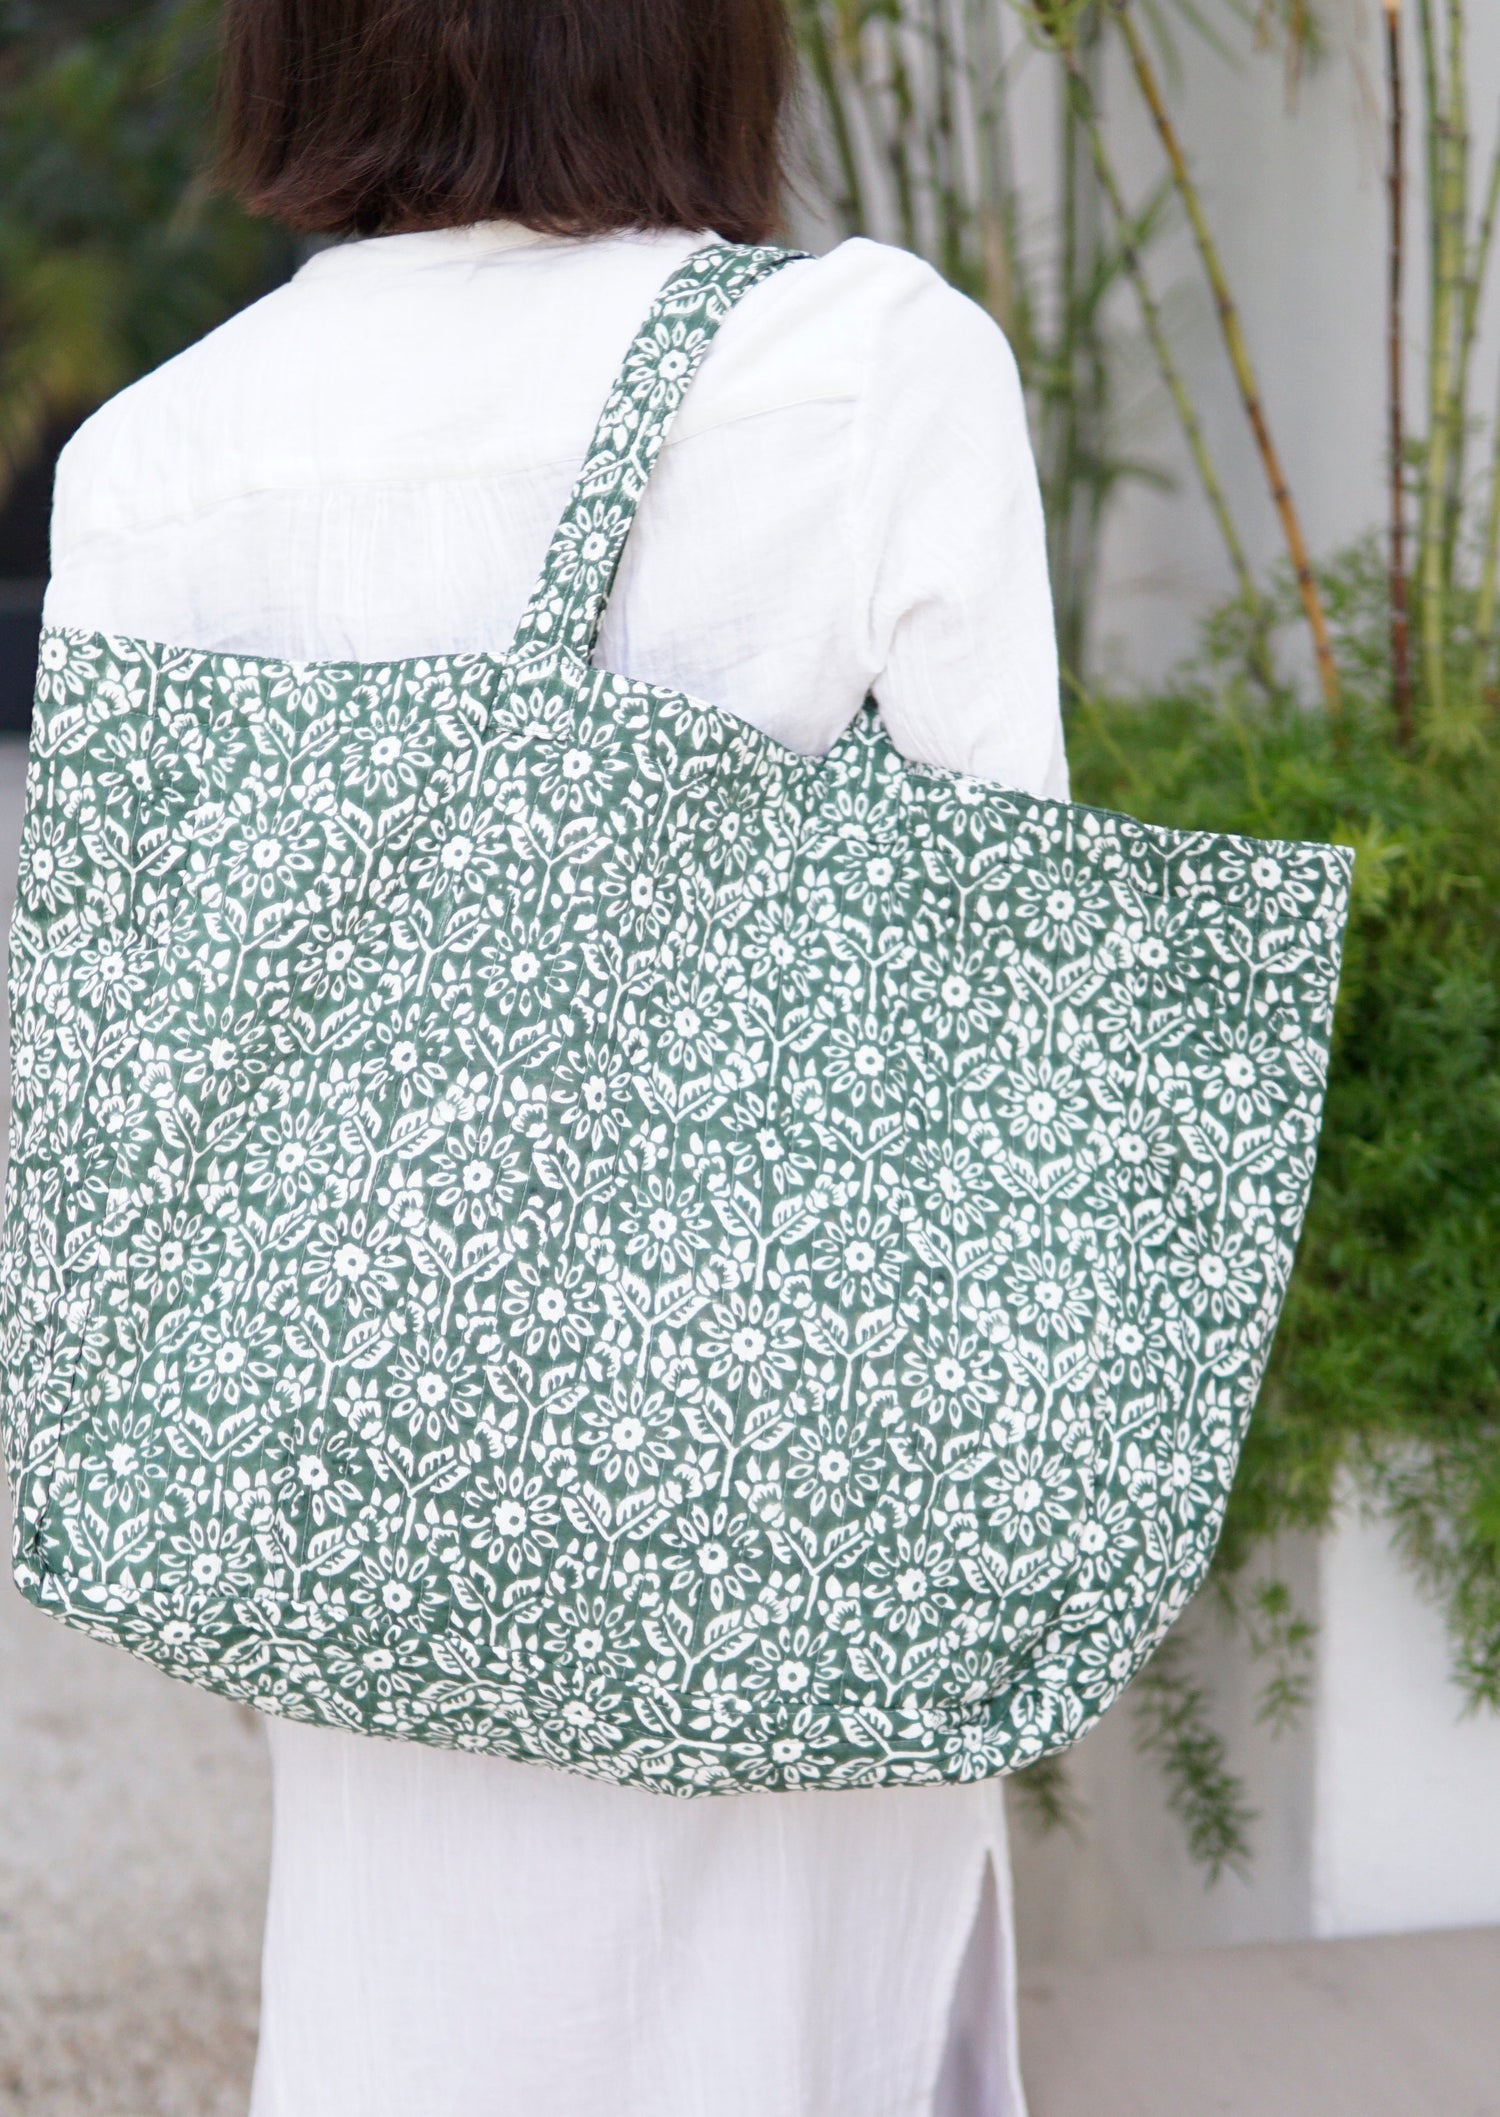 Beach Bag, XL green and white block print, contrast lining with pocket. large beach bag